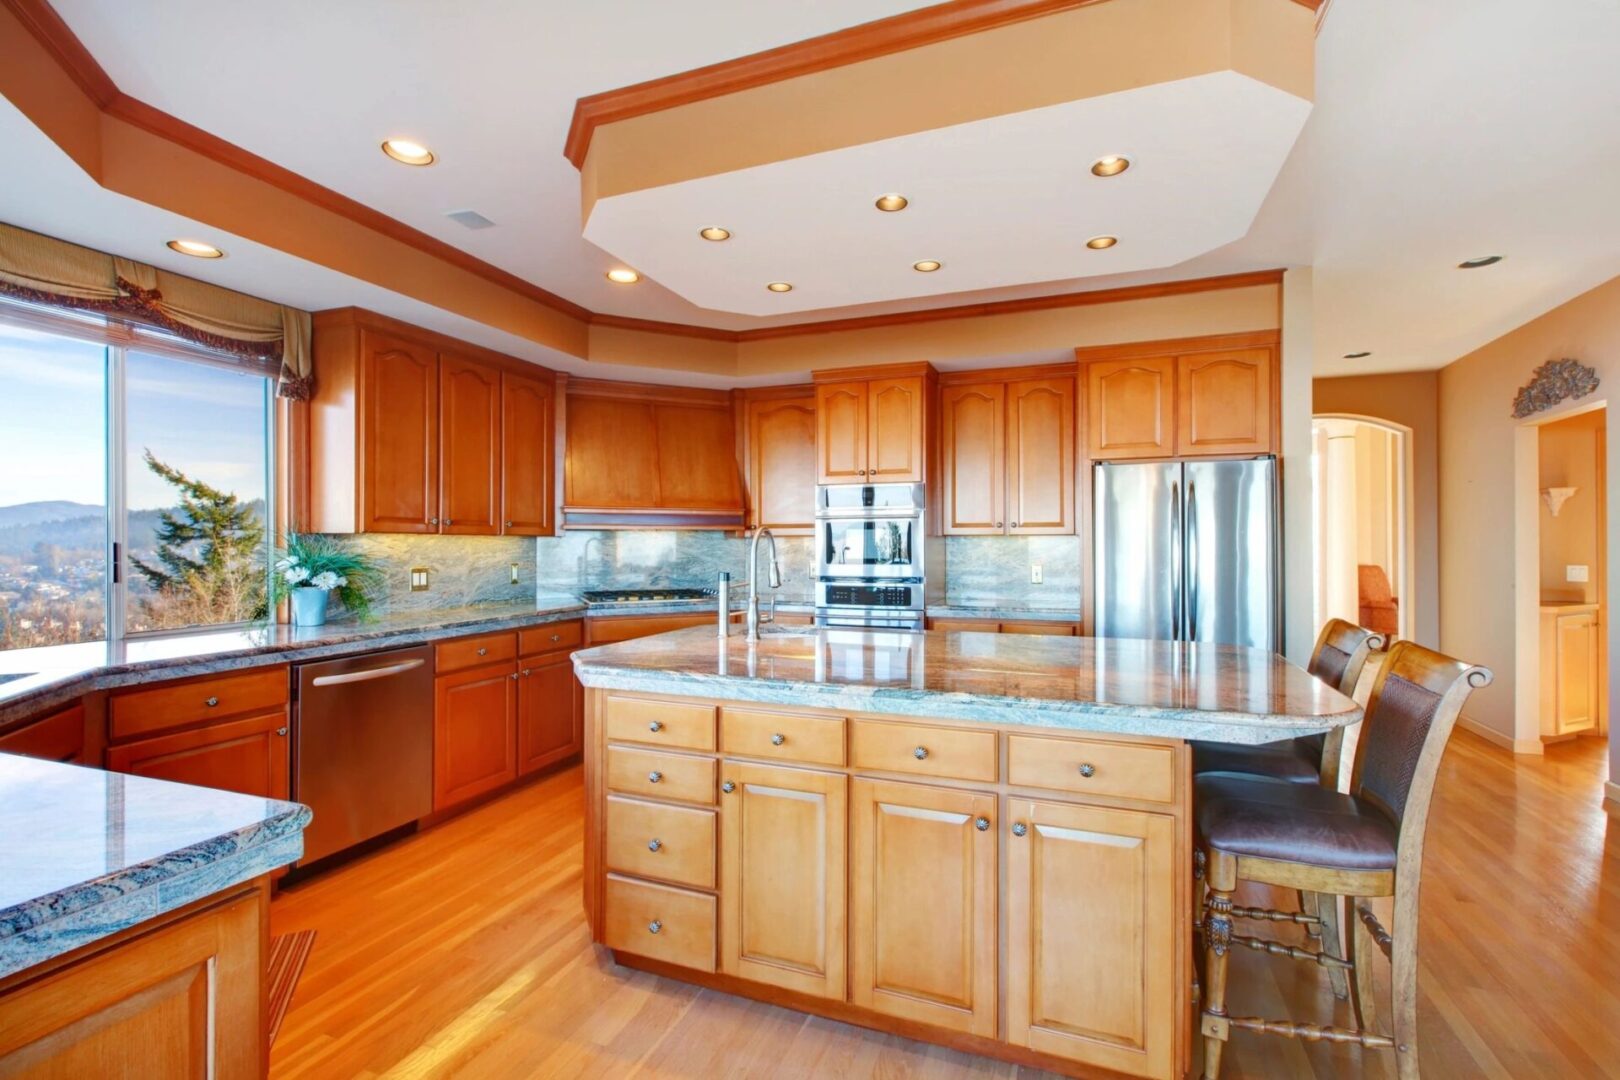 A kitchen with wooden cabinets and stainless steel appliances.